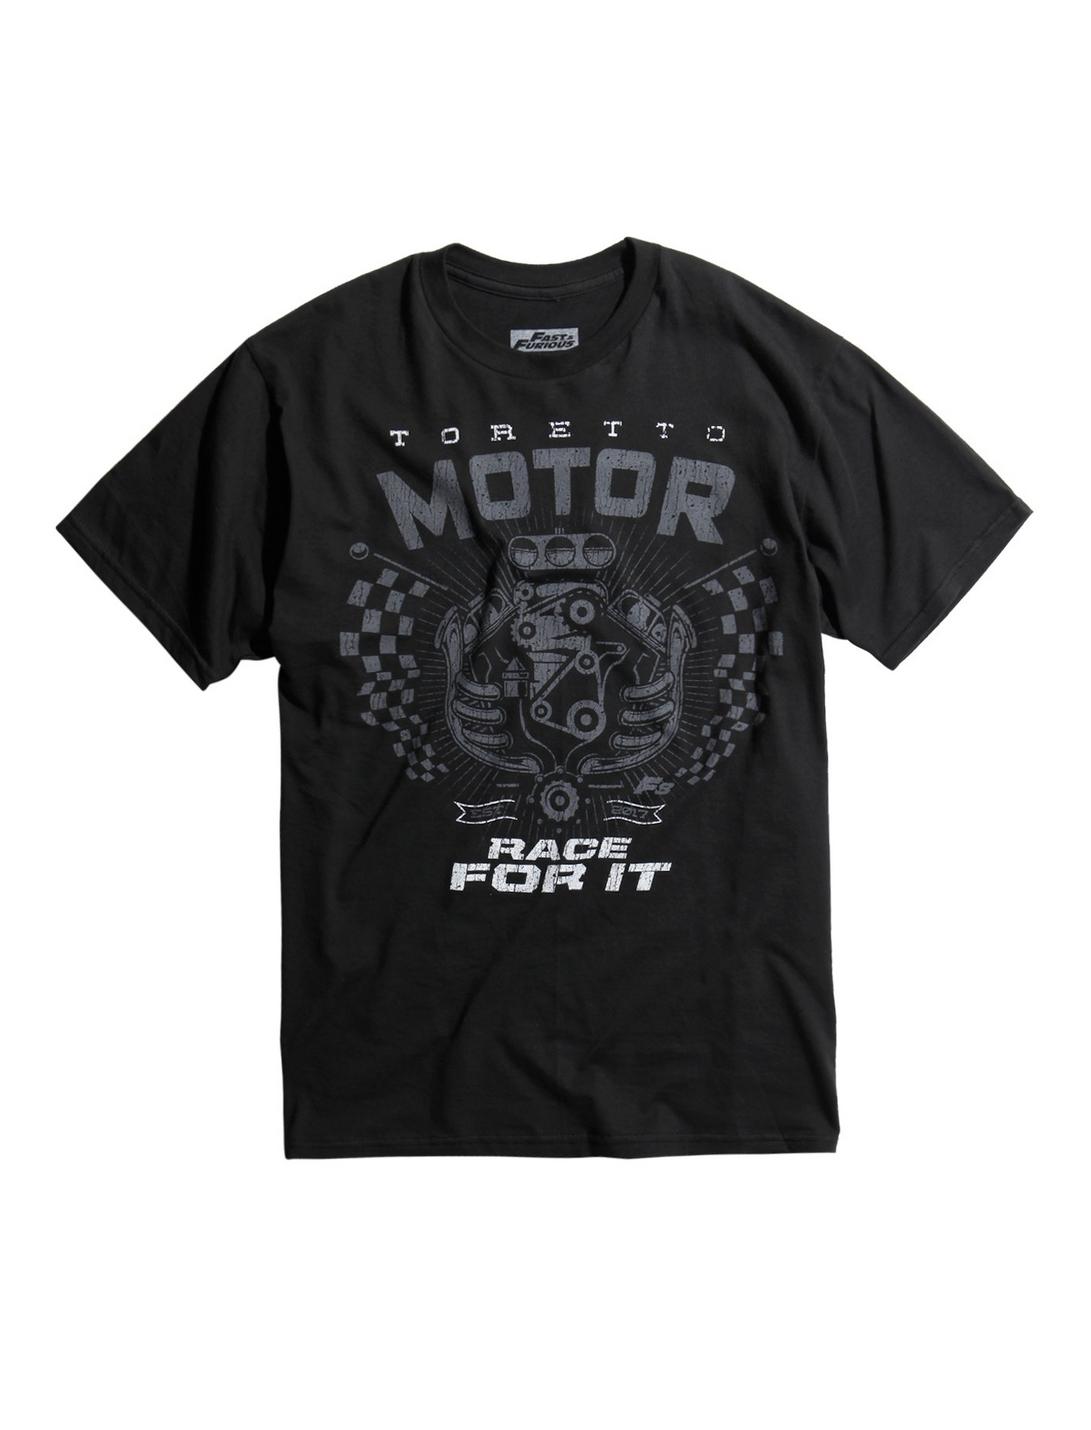 The Fast & The Furious Toretto Motor T-Shirt, BLACK, hi-res